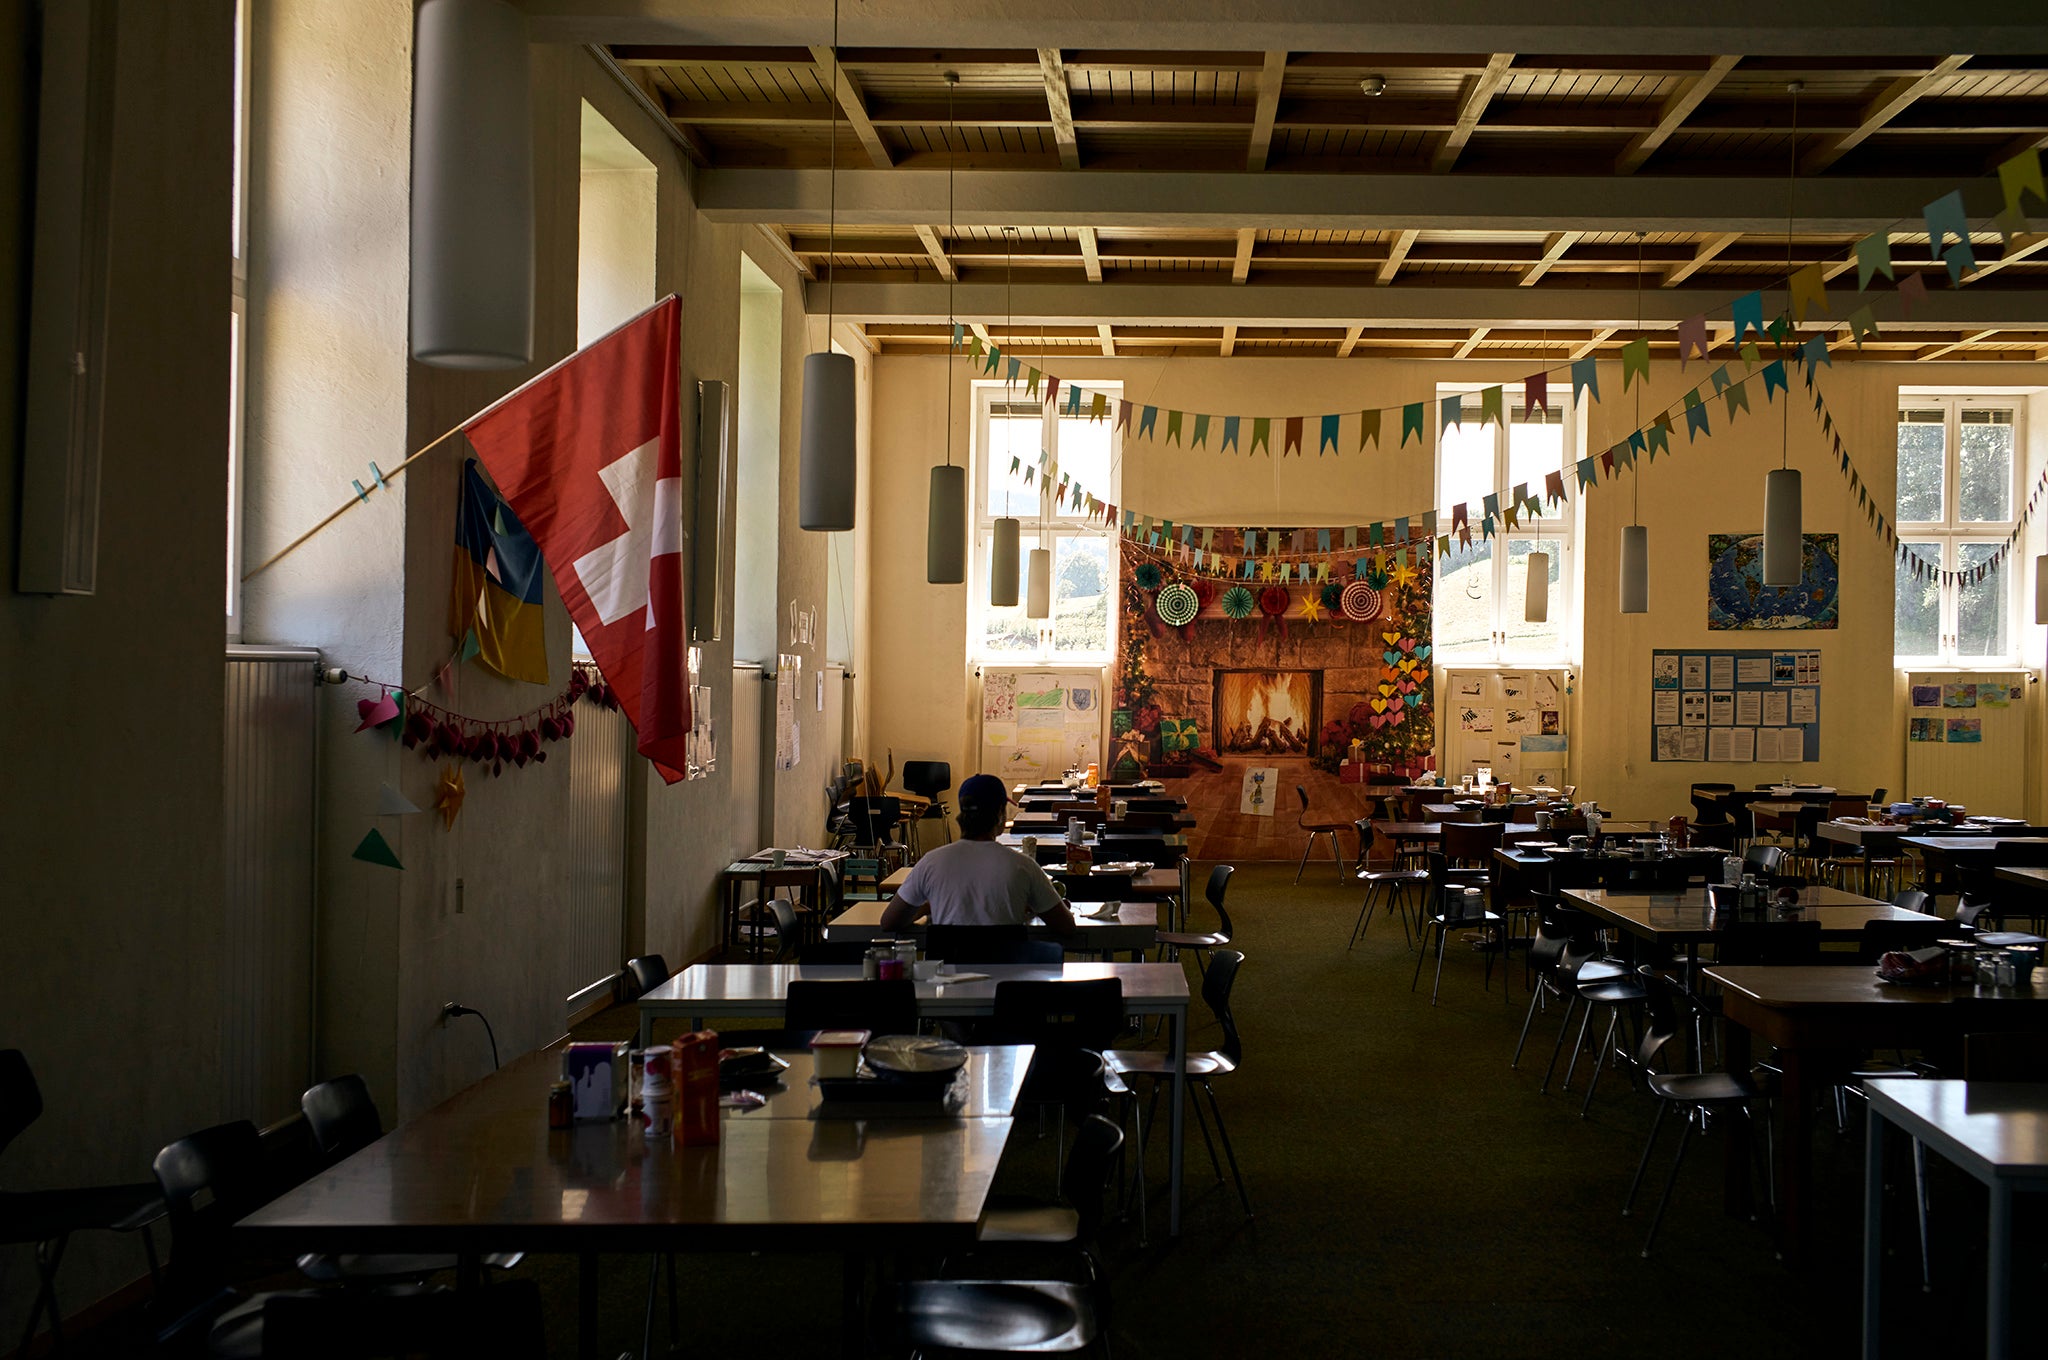 The dining hall at the Swiss monastery